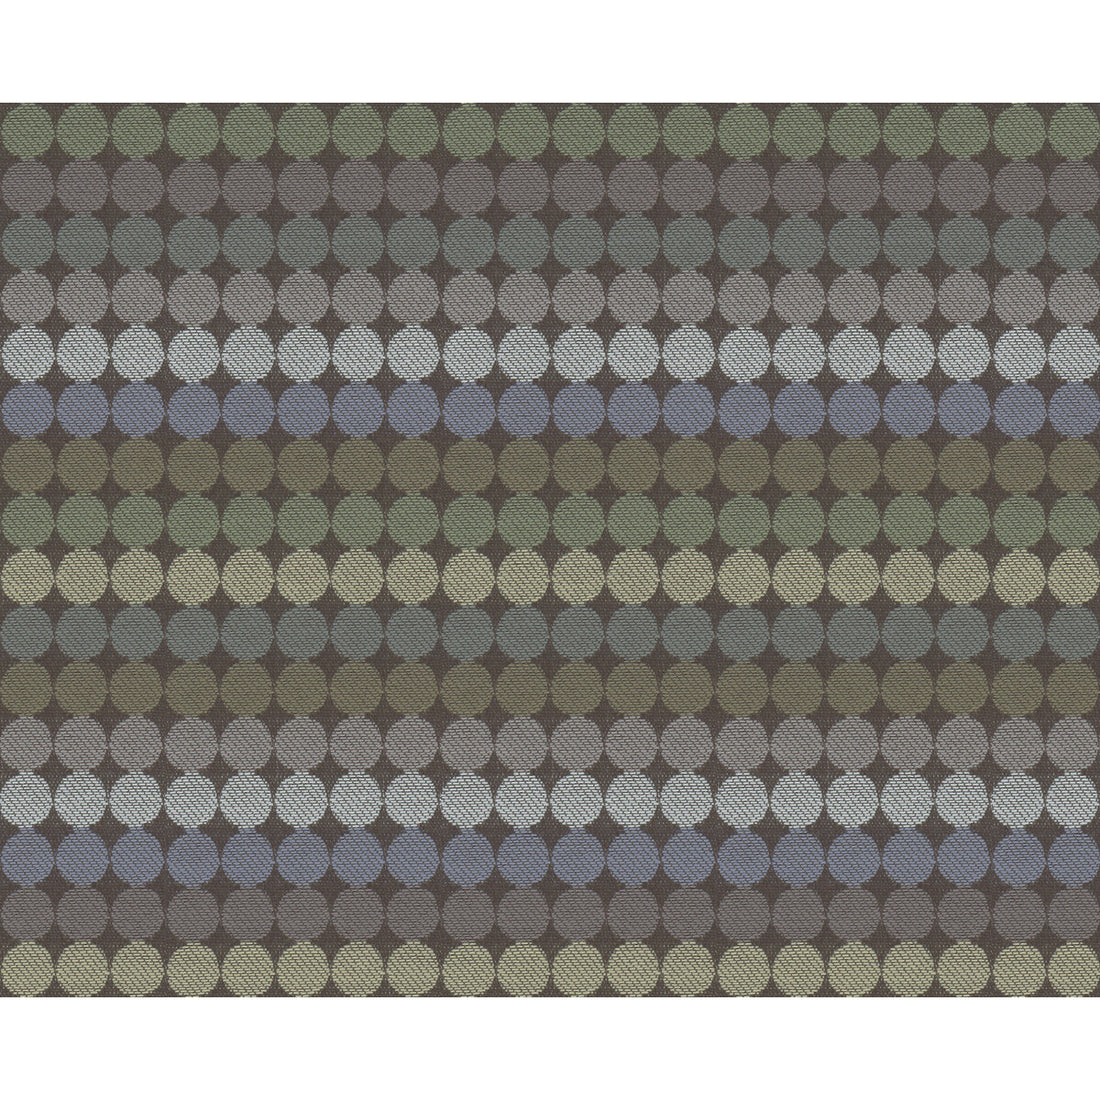 Grab Bag fabric in mineral color - pattern 34656.21.0 - by Kravet Contract in the Gis collection